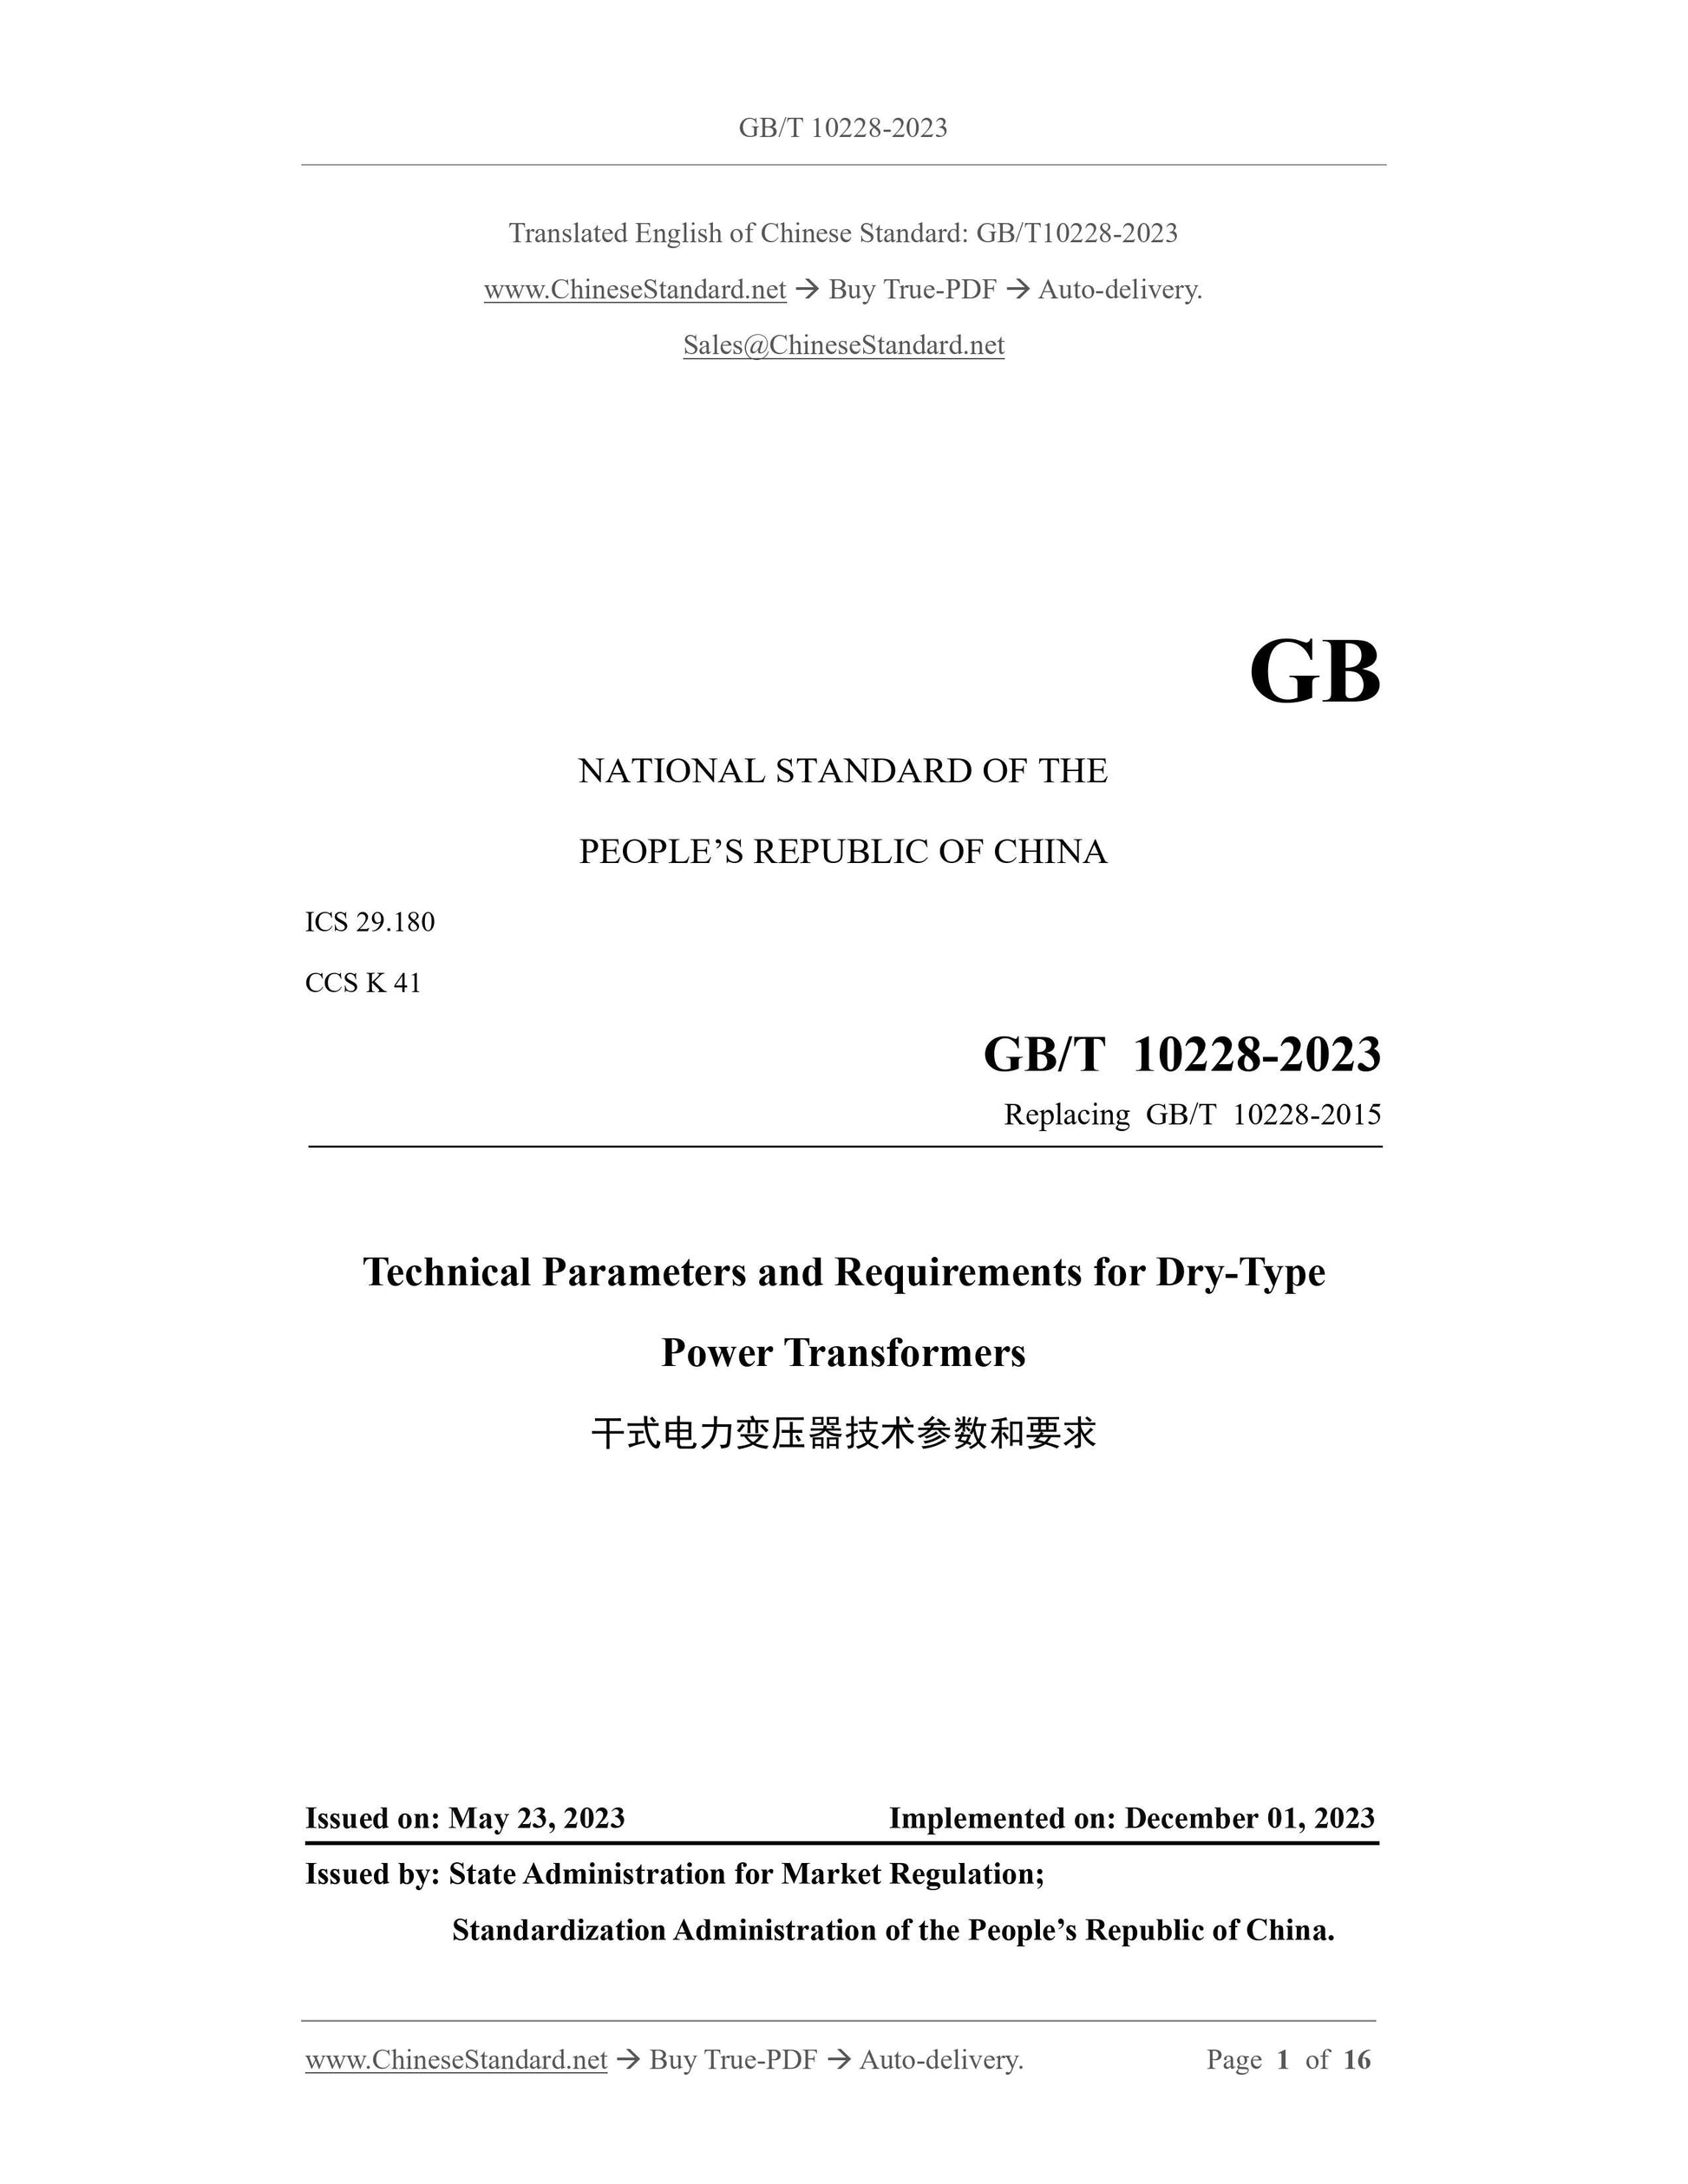 GB/T 10228-2023 Page 1